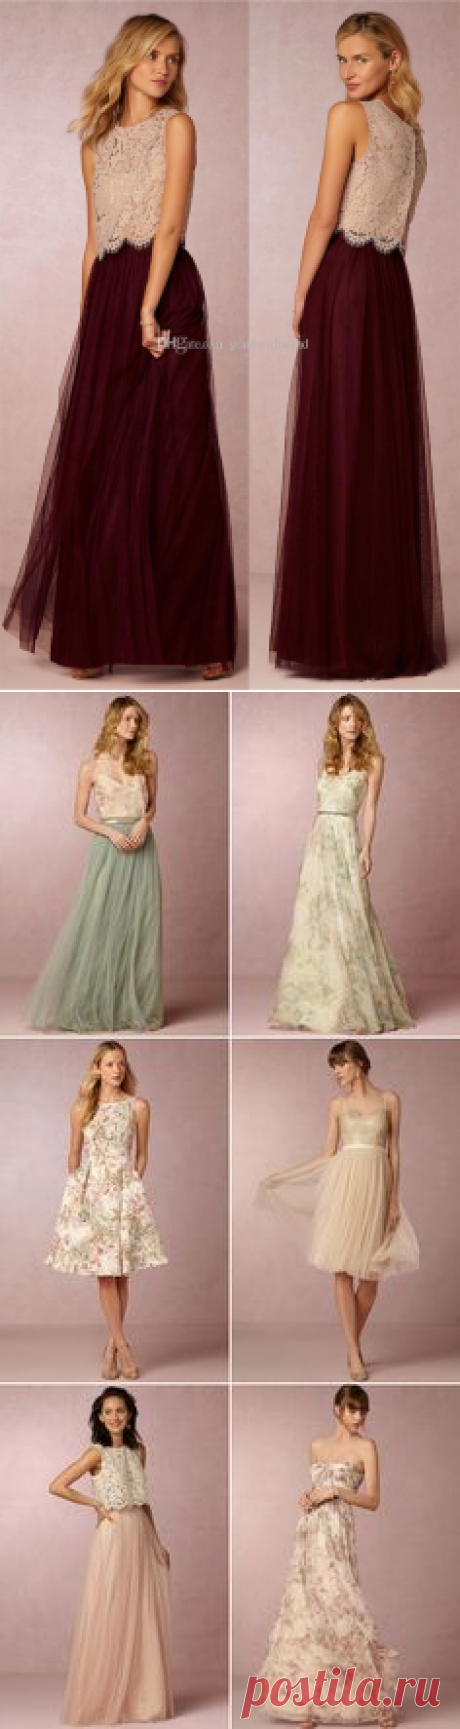 (31) 2016 long burgundy bridesmaid dresses lace top and tulle skirt dresses for wedding wedding guest dresses party dresses